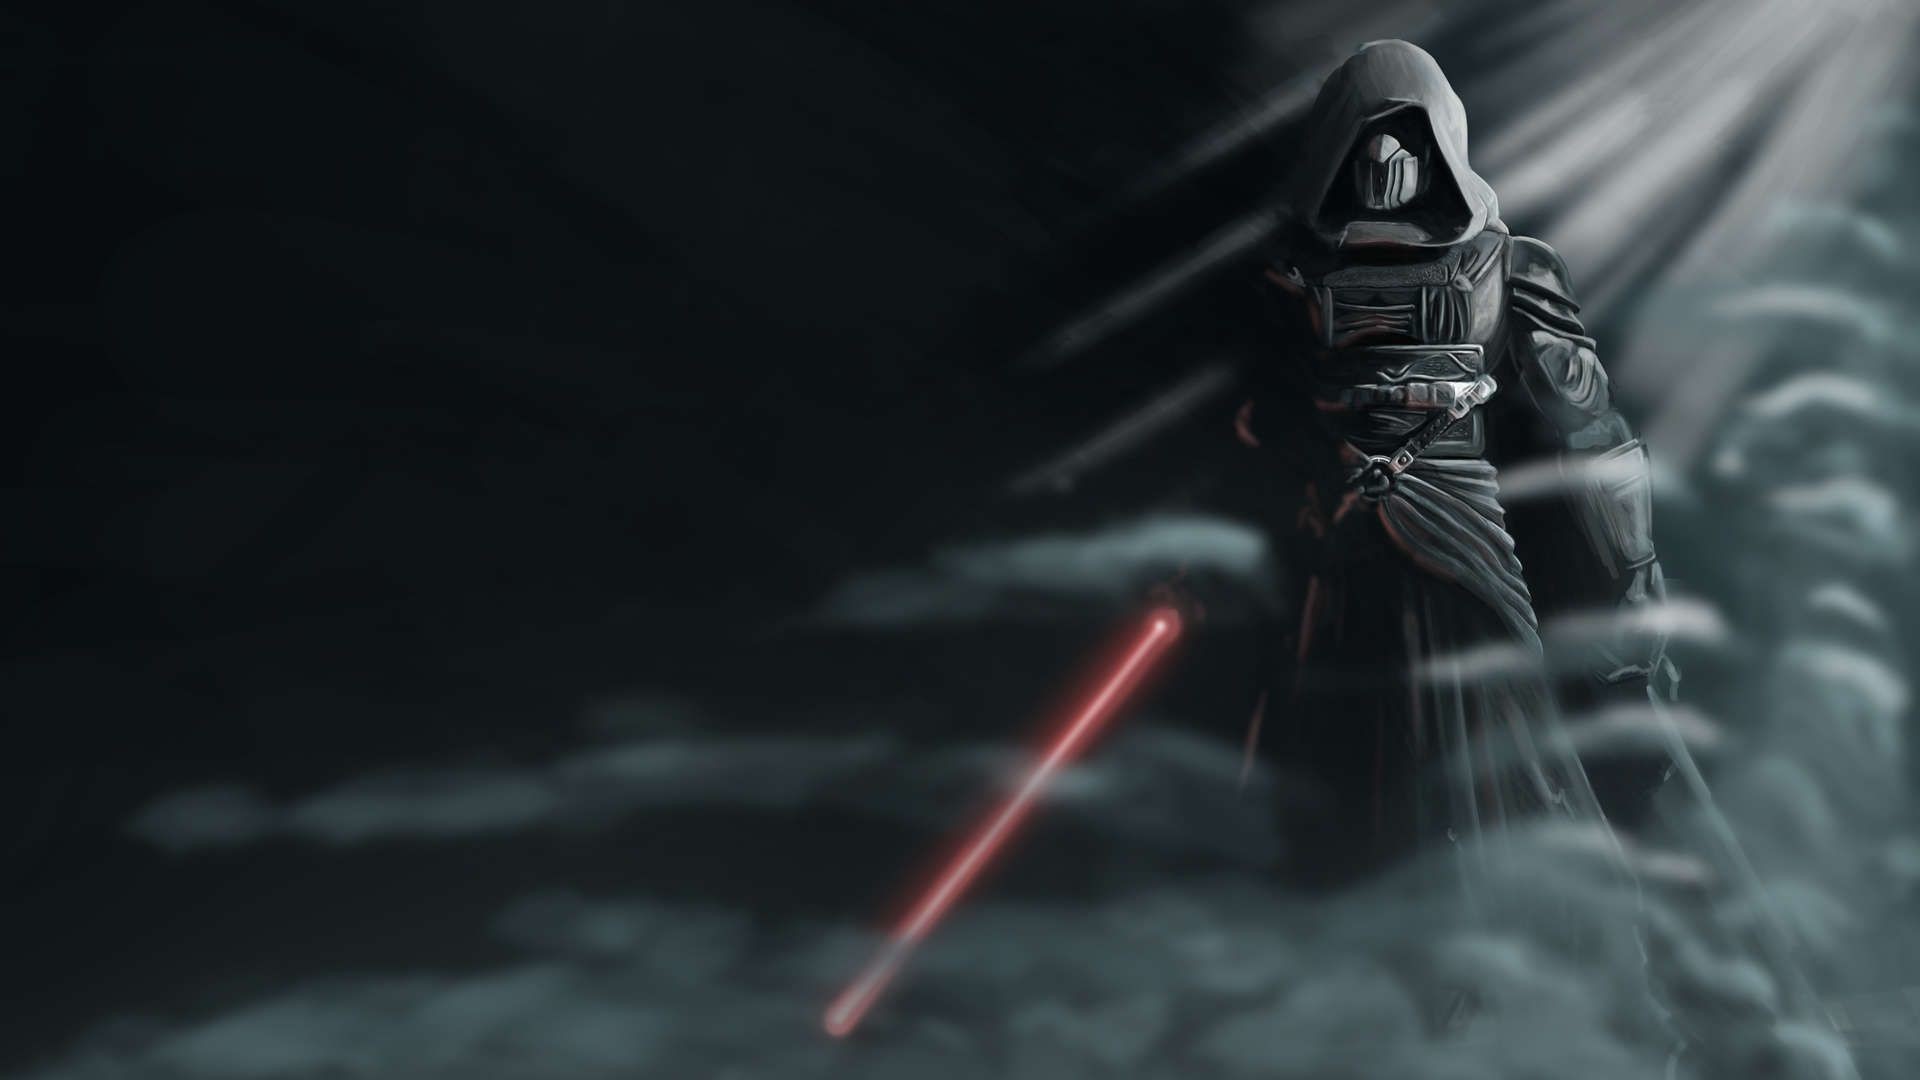 1920x1080 Star Wars Sith Wallpapers Full Hd As Wallpaper HD For Stars, Star Wars  Wallpaper,